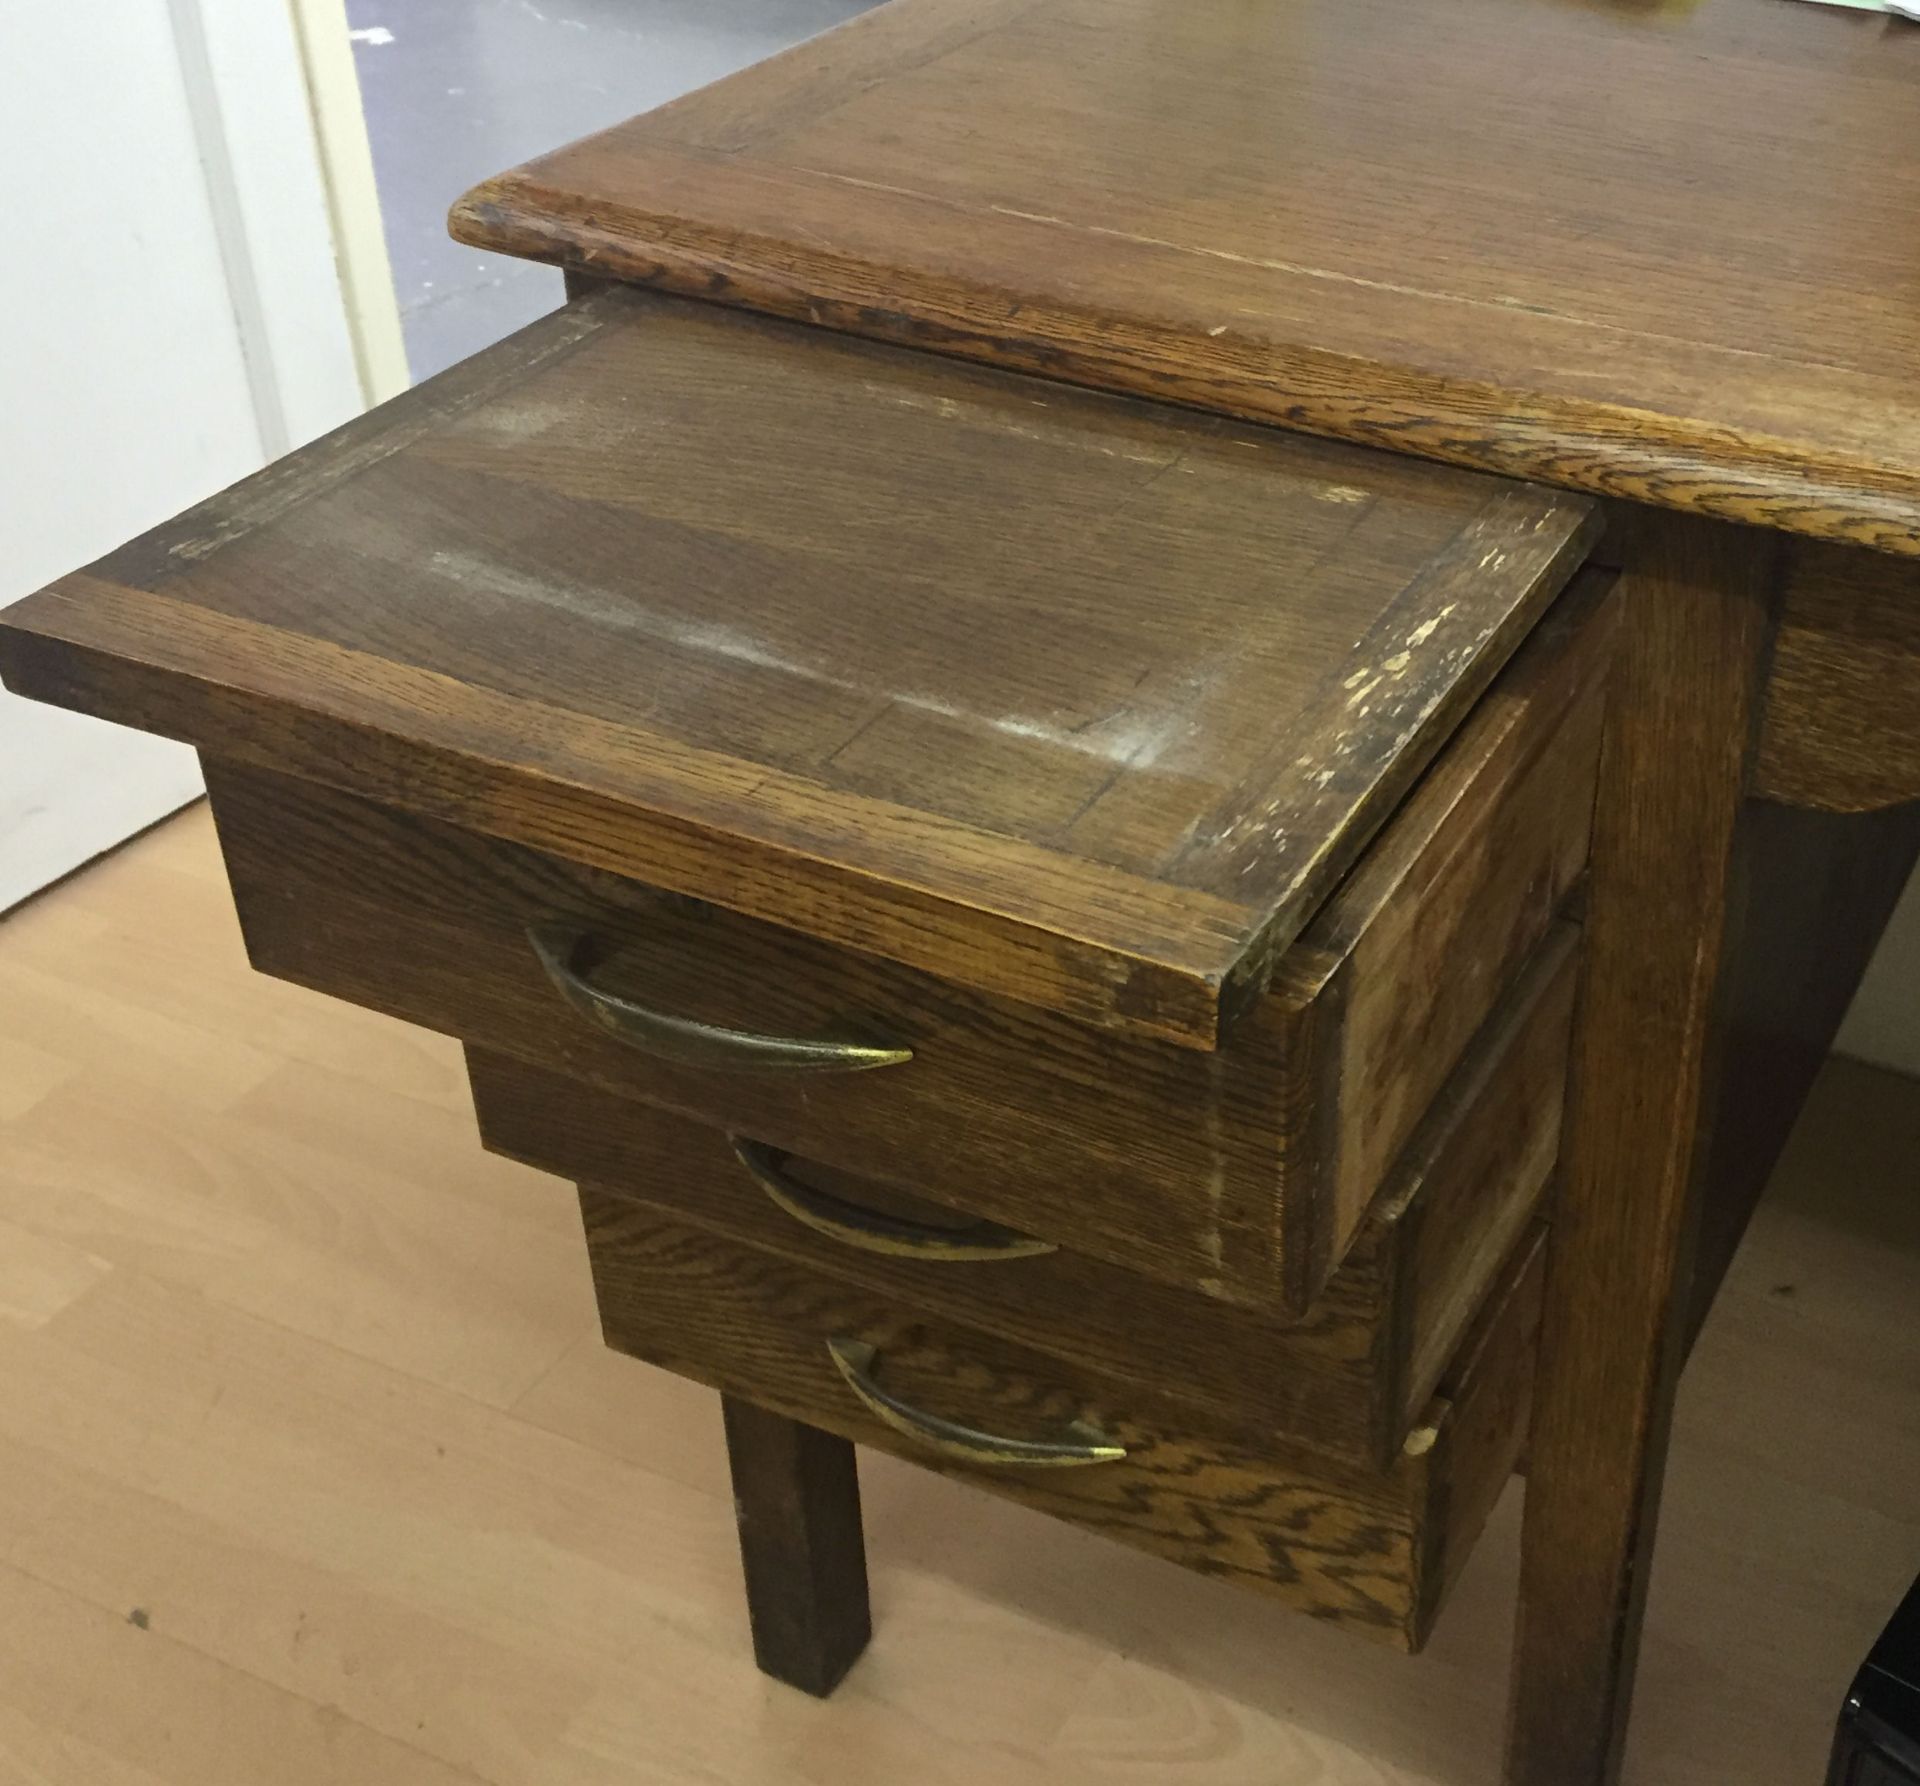 1 x Attractive Writing Desk - CL171 - Location: London, N4 - Image 8 of 8